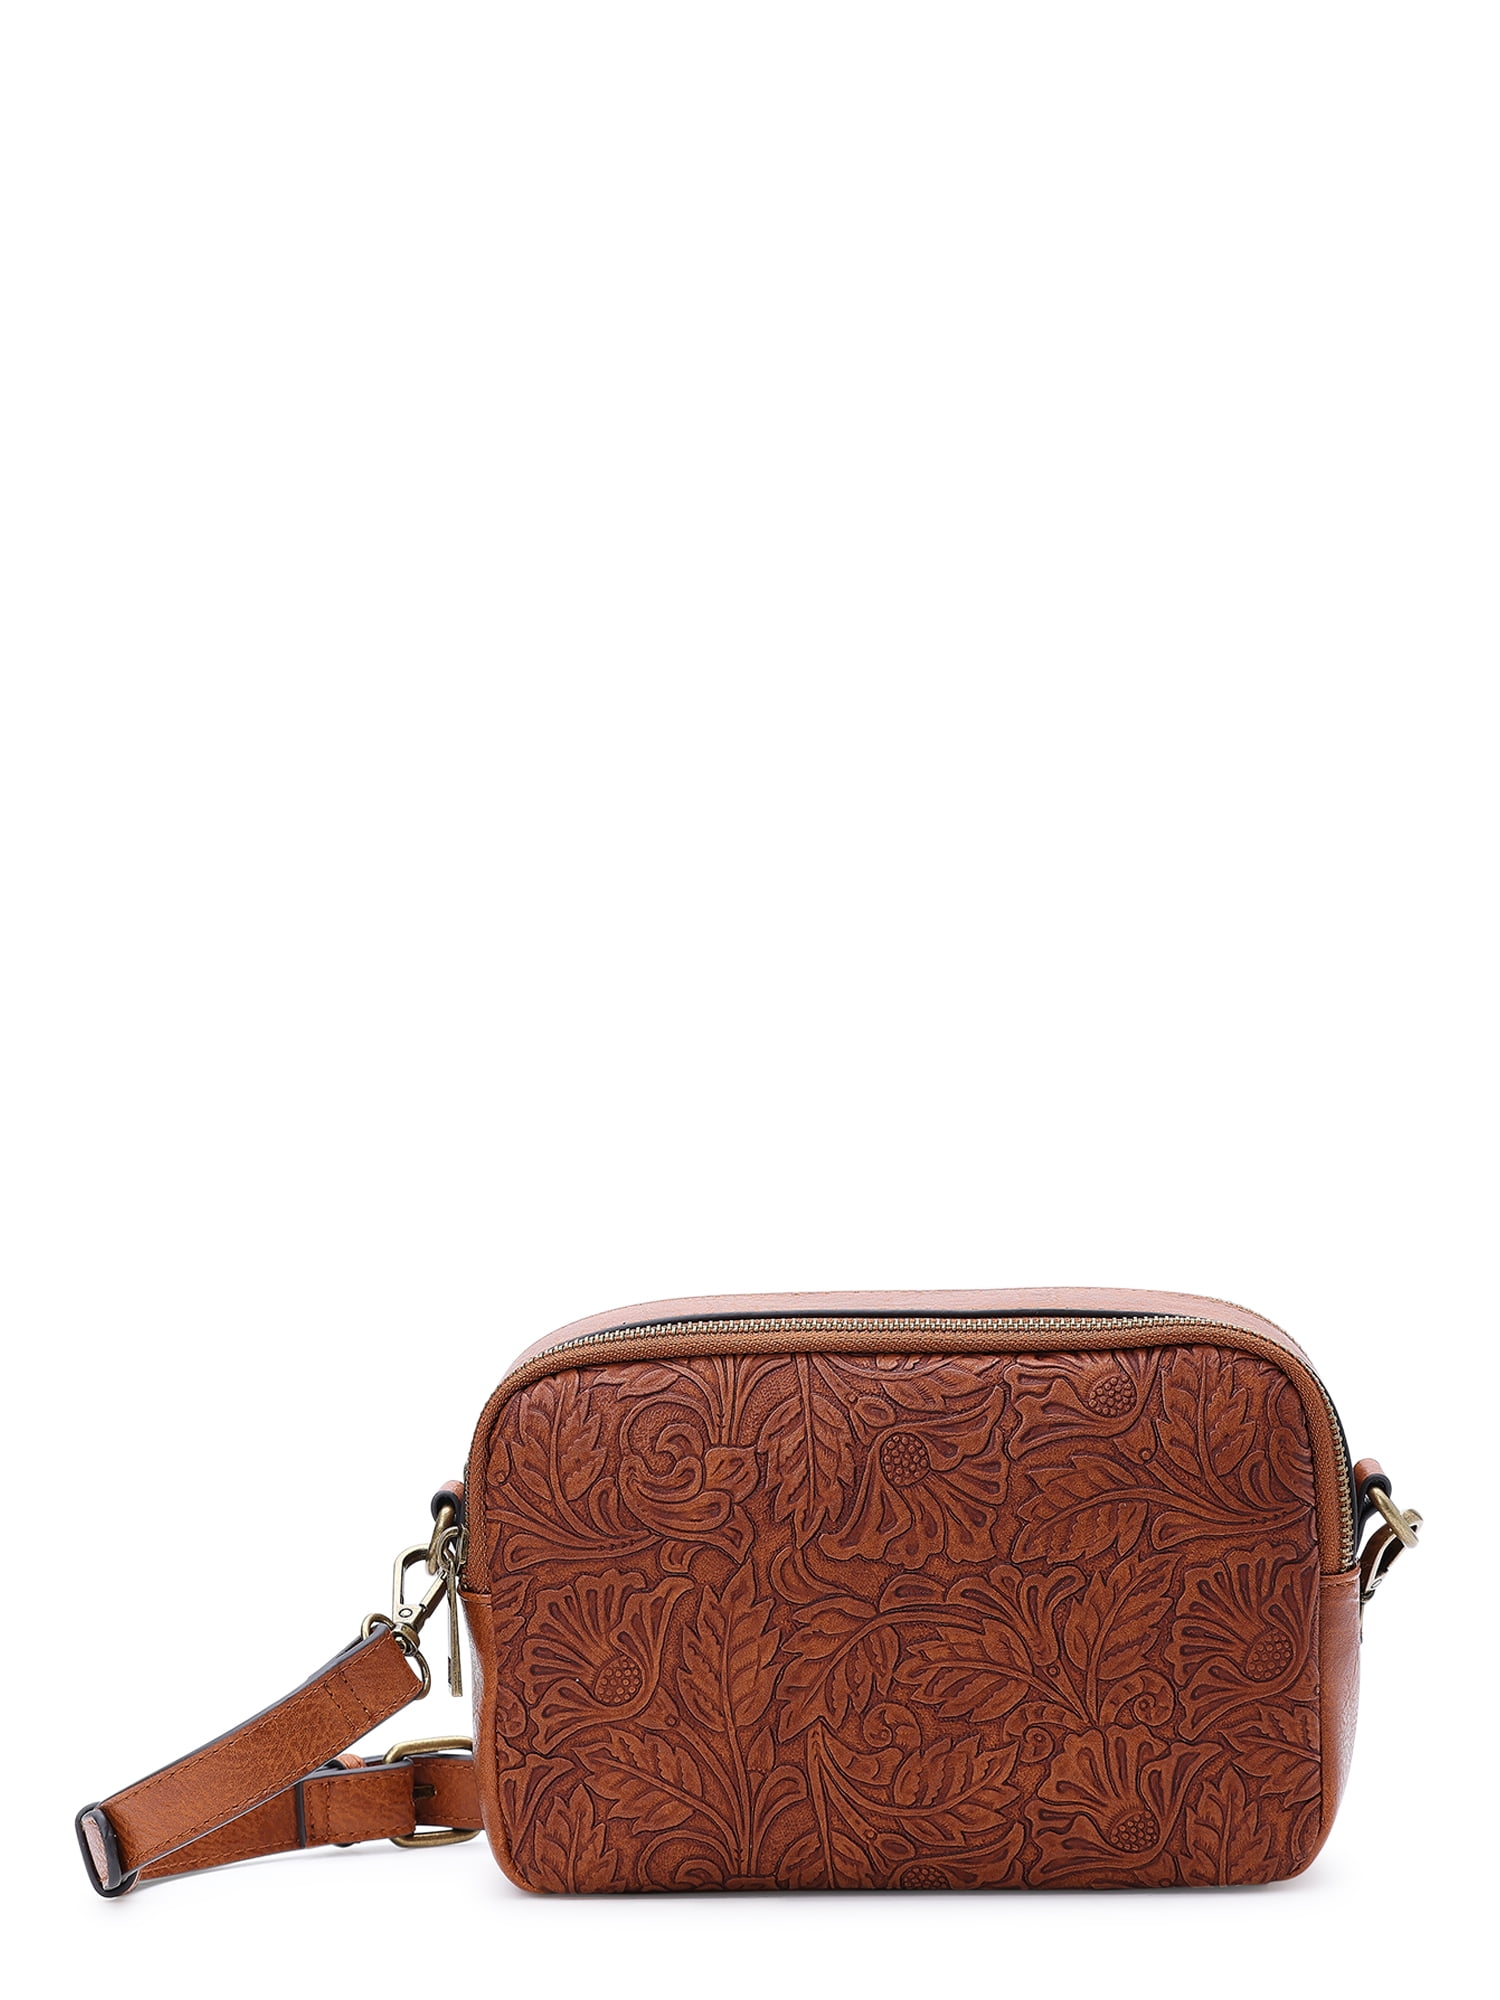 The Pioneer Woman Tooled Faux Leather Camera Bag Crossbody